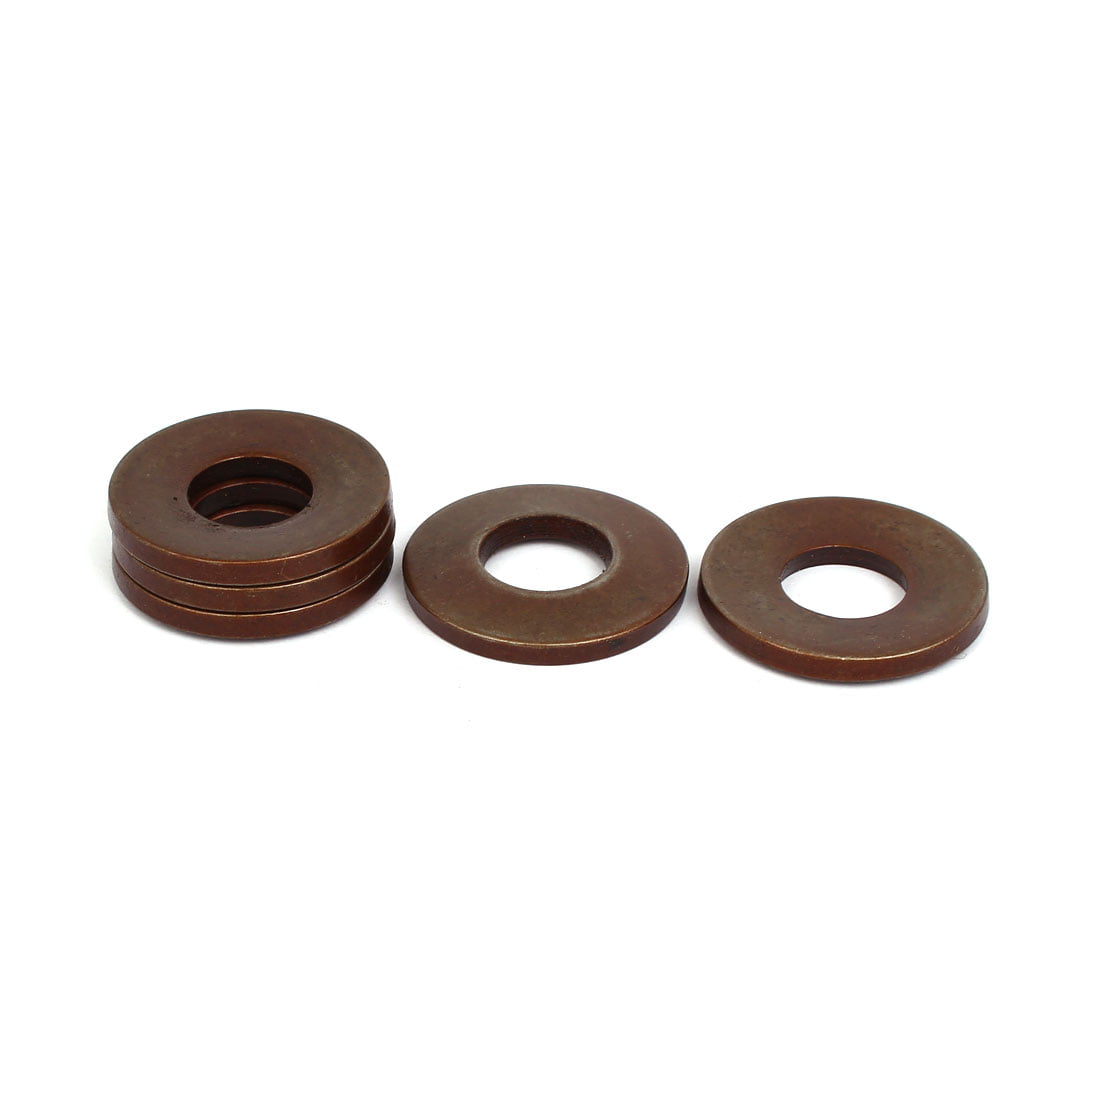 Aexit 25mm Outer Washers Dia 12.2mm Inner Diameter 1.5mm Thickness Belleville Spring Belleville Washers Washer 15pcs 